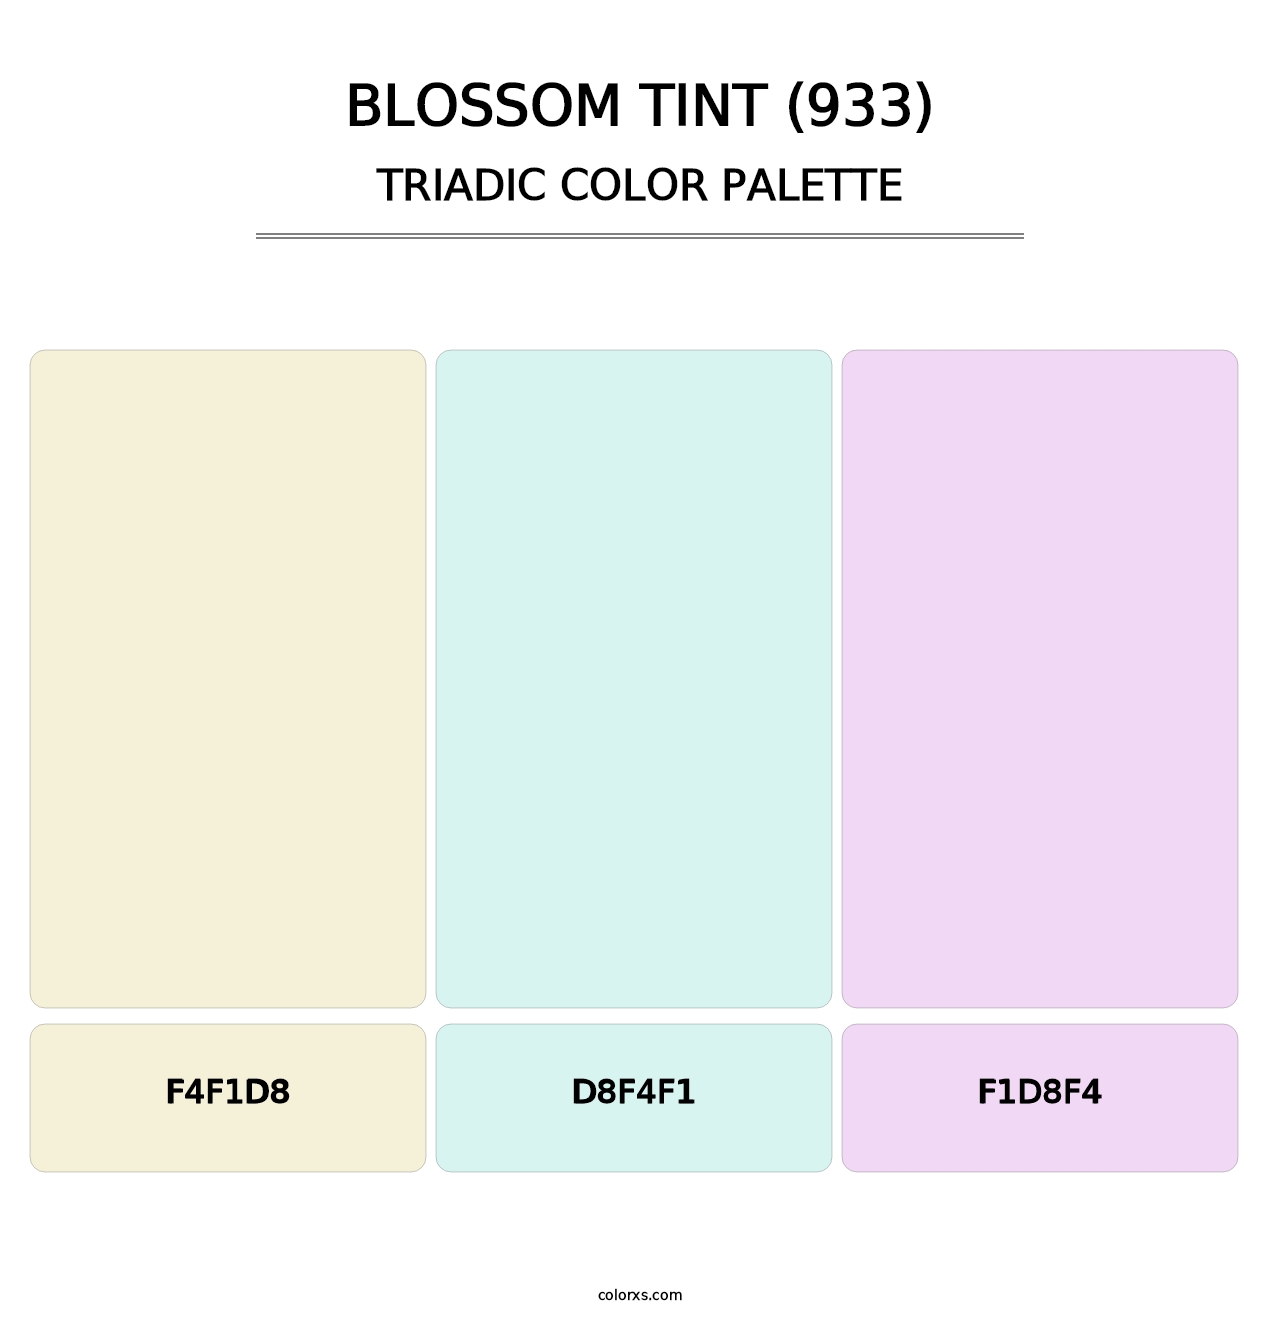 Blossom Tint (933) - Triadic Color Palette